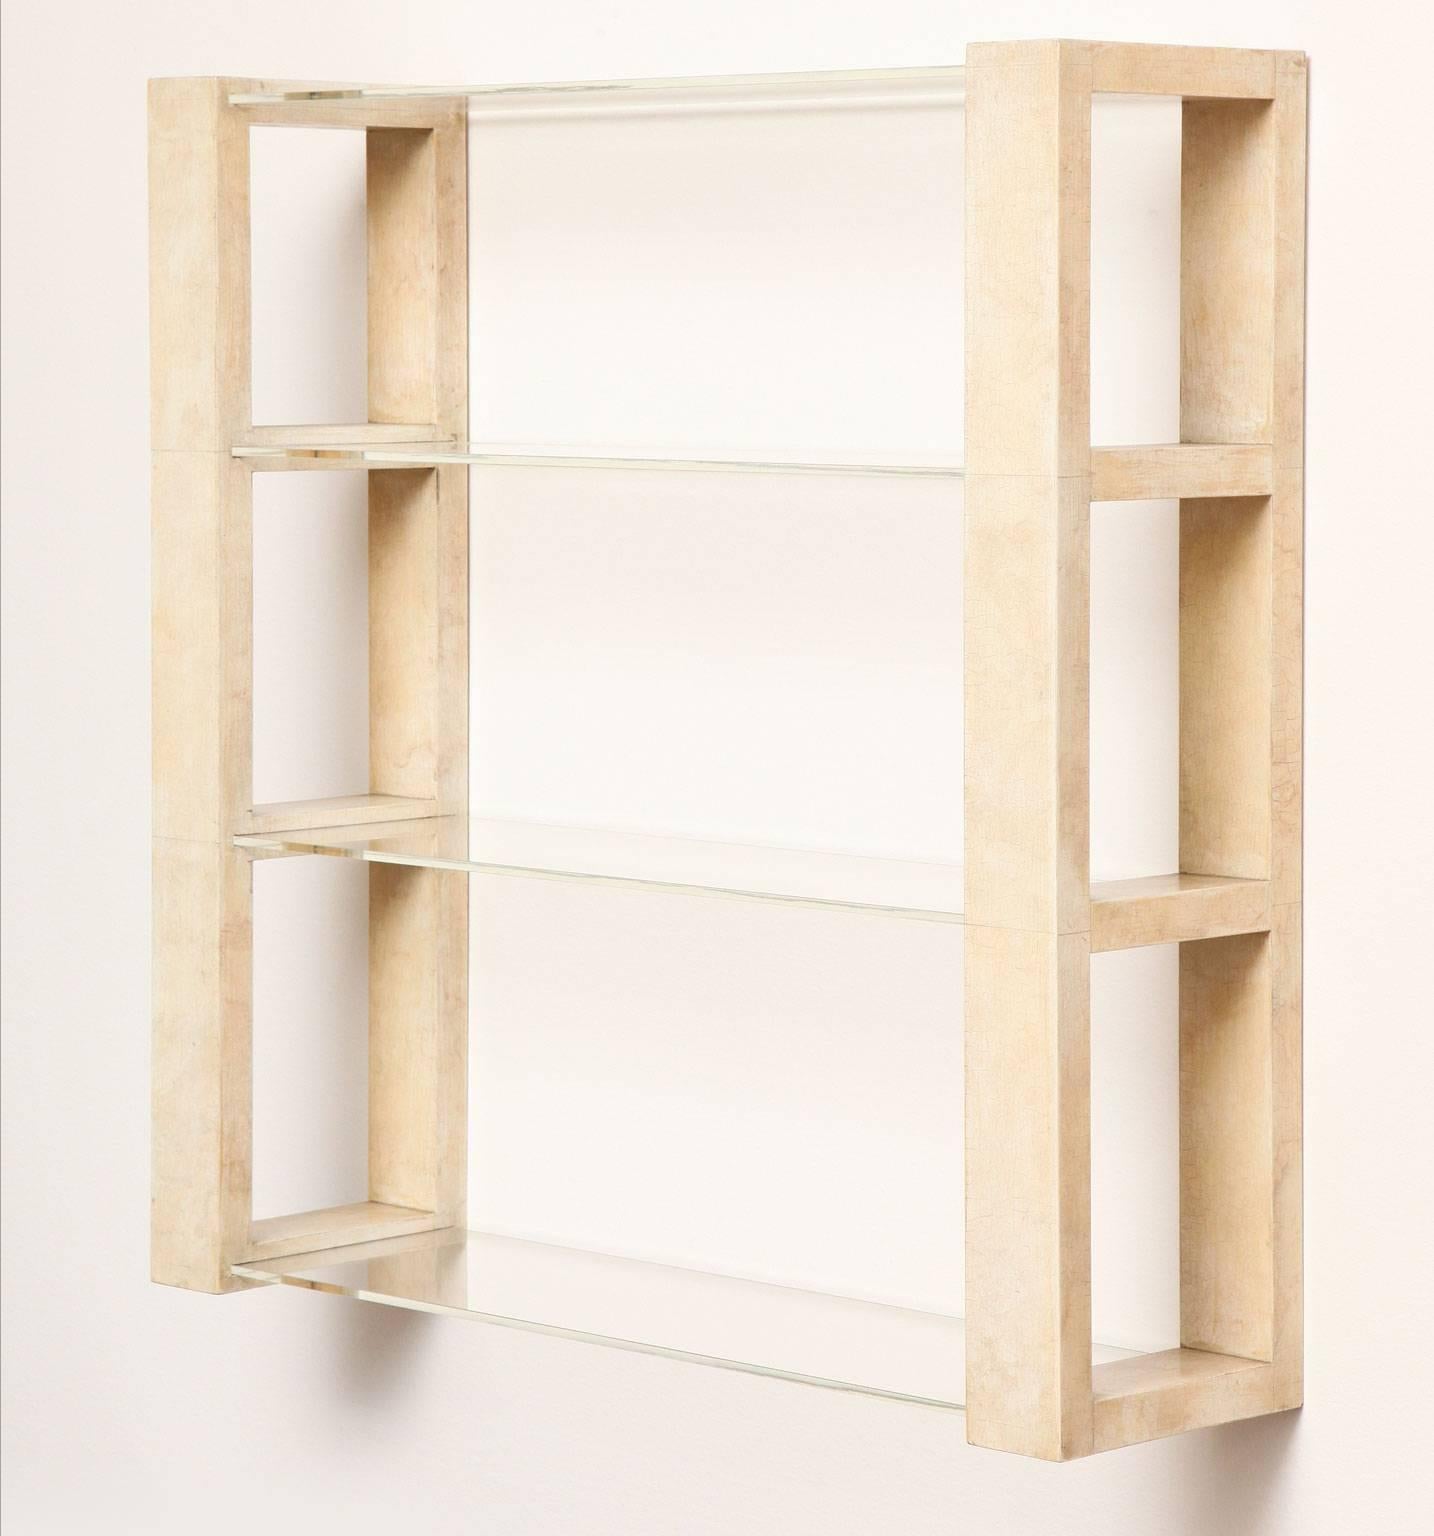 Wall-hanging bookcase in wood with crackle lacquer finish and four glass shelves. Manufactured by Quigley & Company.